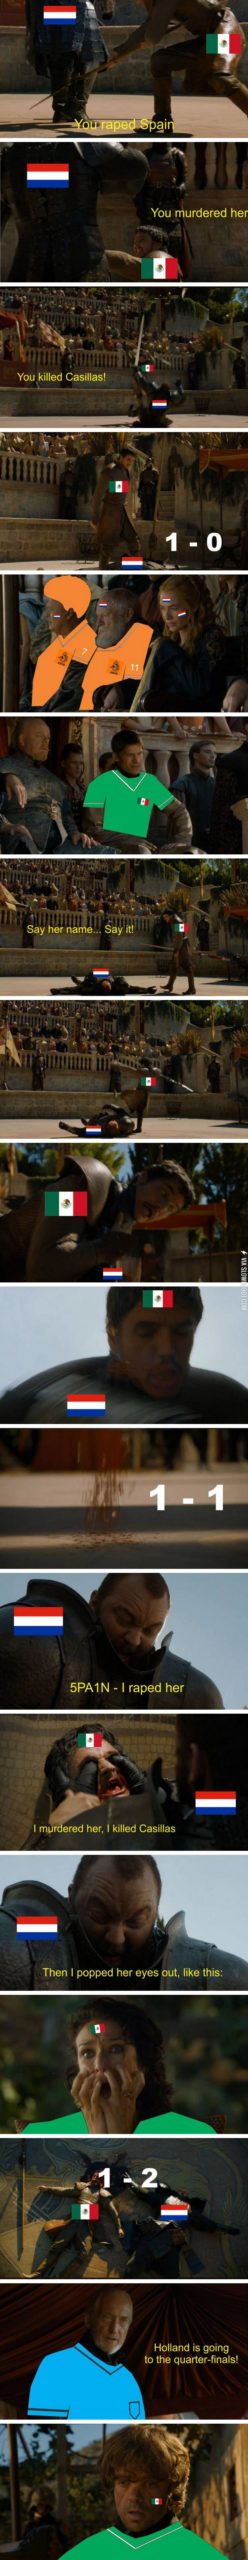 Mexico+vs.+The+Netherlands+as+Game+of+Thrones%26%238217%3B+Oberyn+and+The+Mountain.